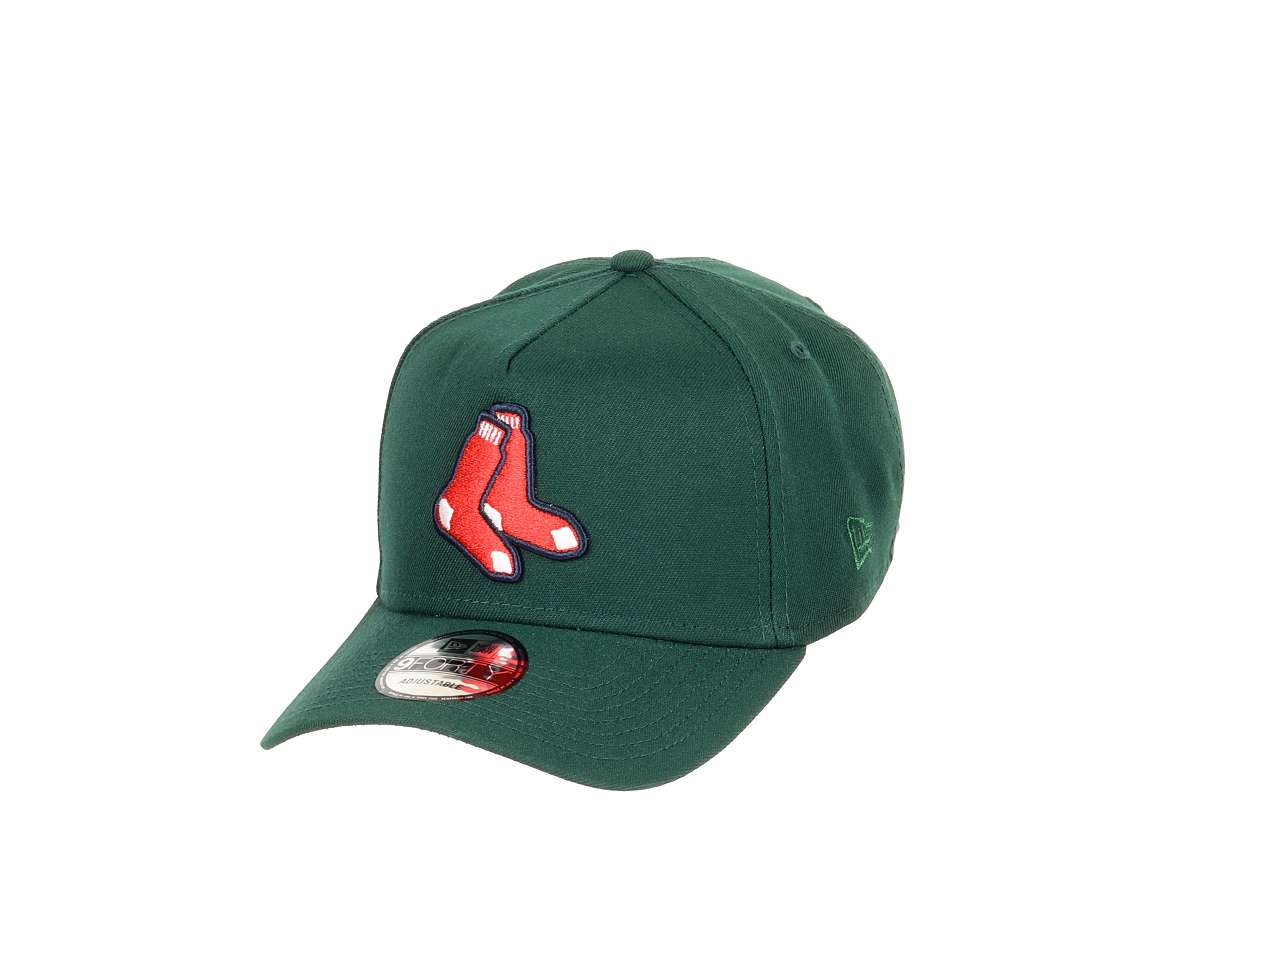 Boston Red Sox MLB Fenway Park 100 Years Sidepatch Cooperstown Dark Green 9Forty A-Frame Snapback Cap New Era